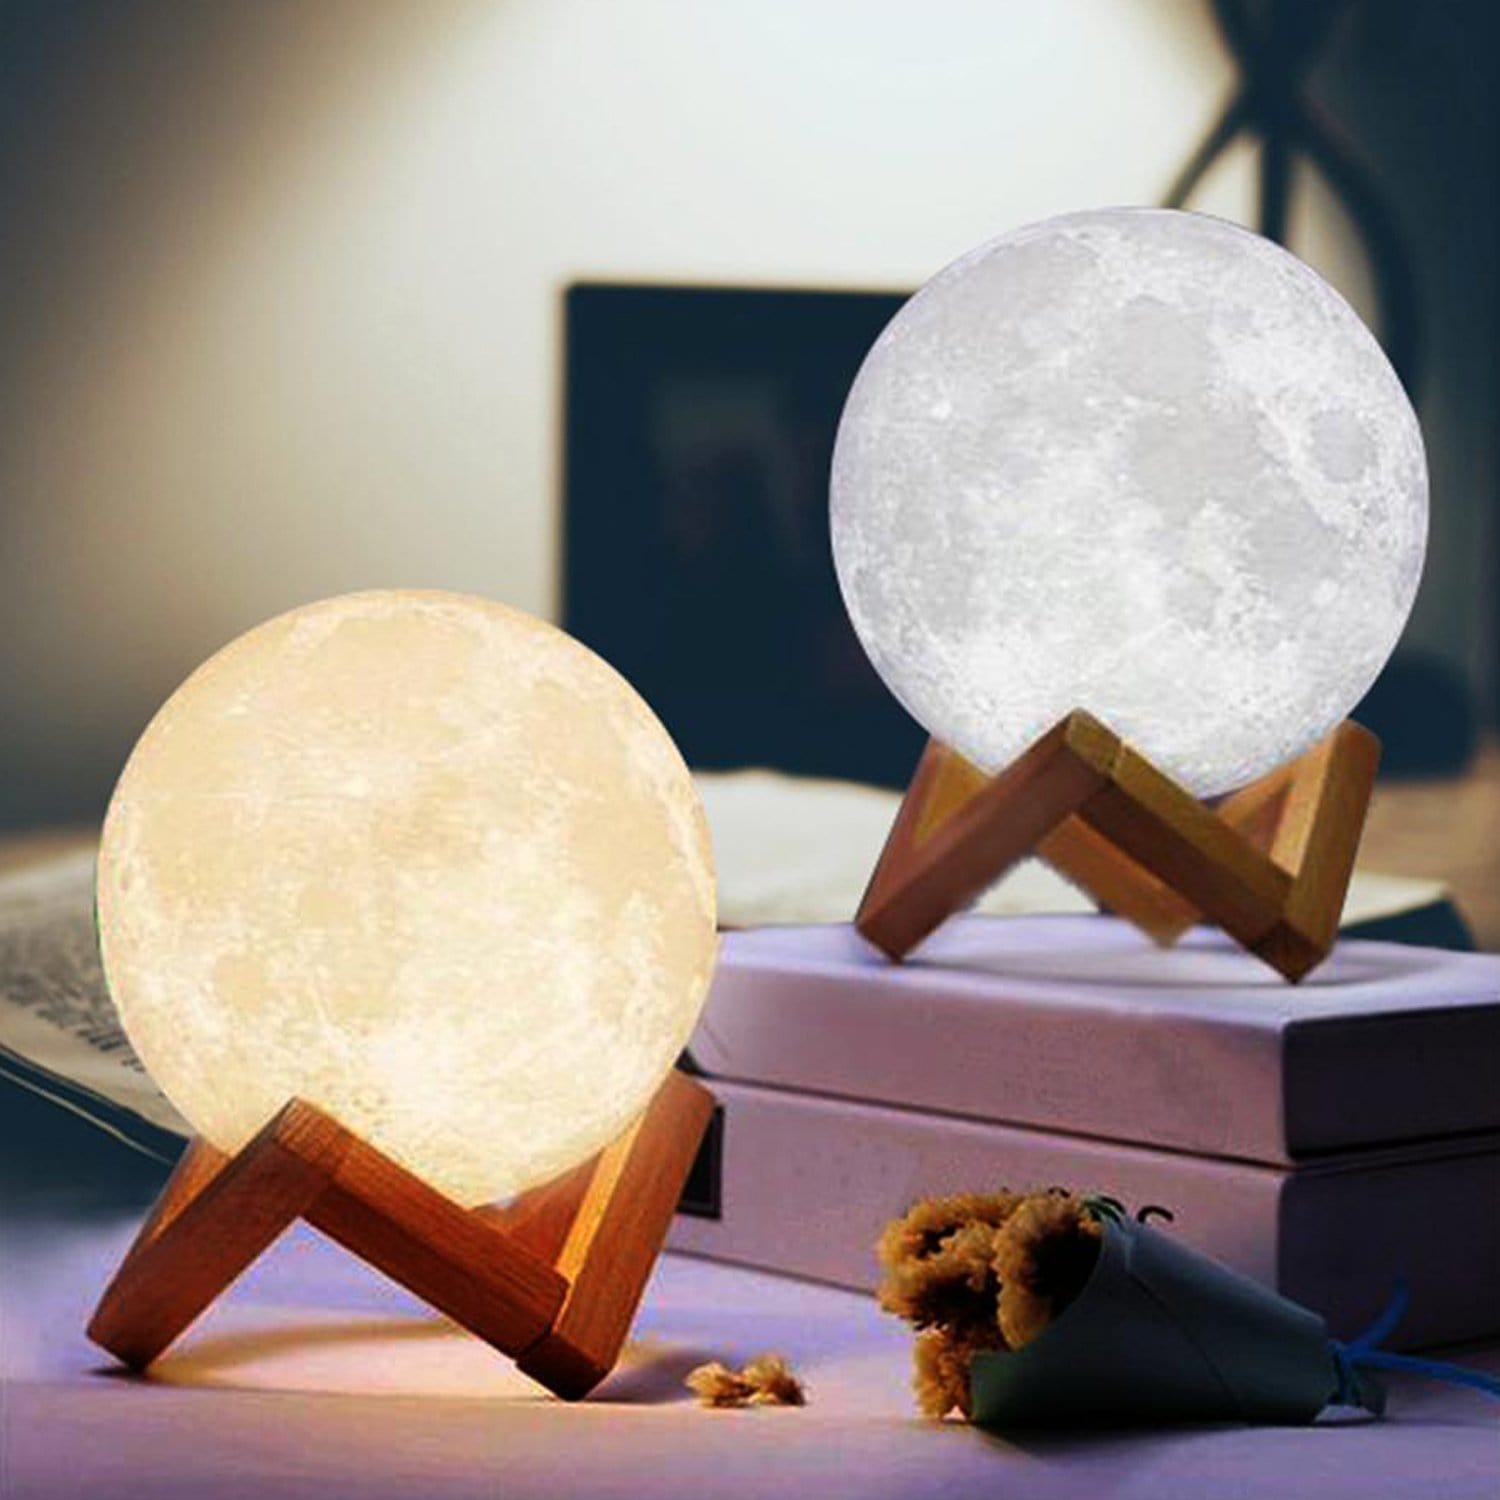 Moon Lamp To My Wife I Love You - 3D LED Engraving Moon Lamp GiveMe-Gifts